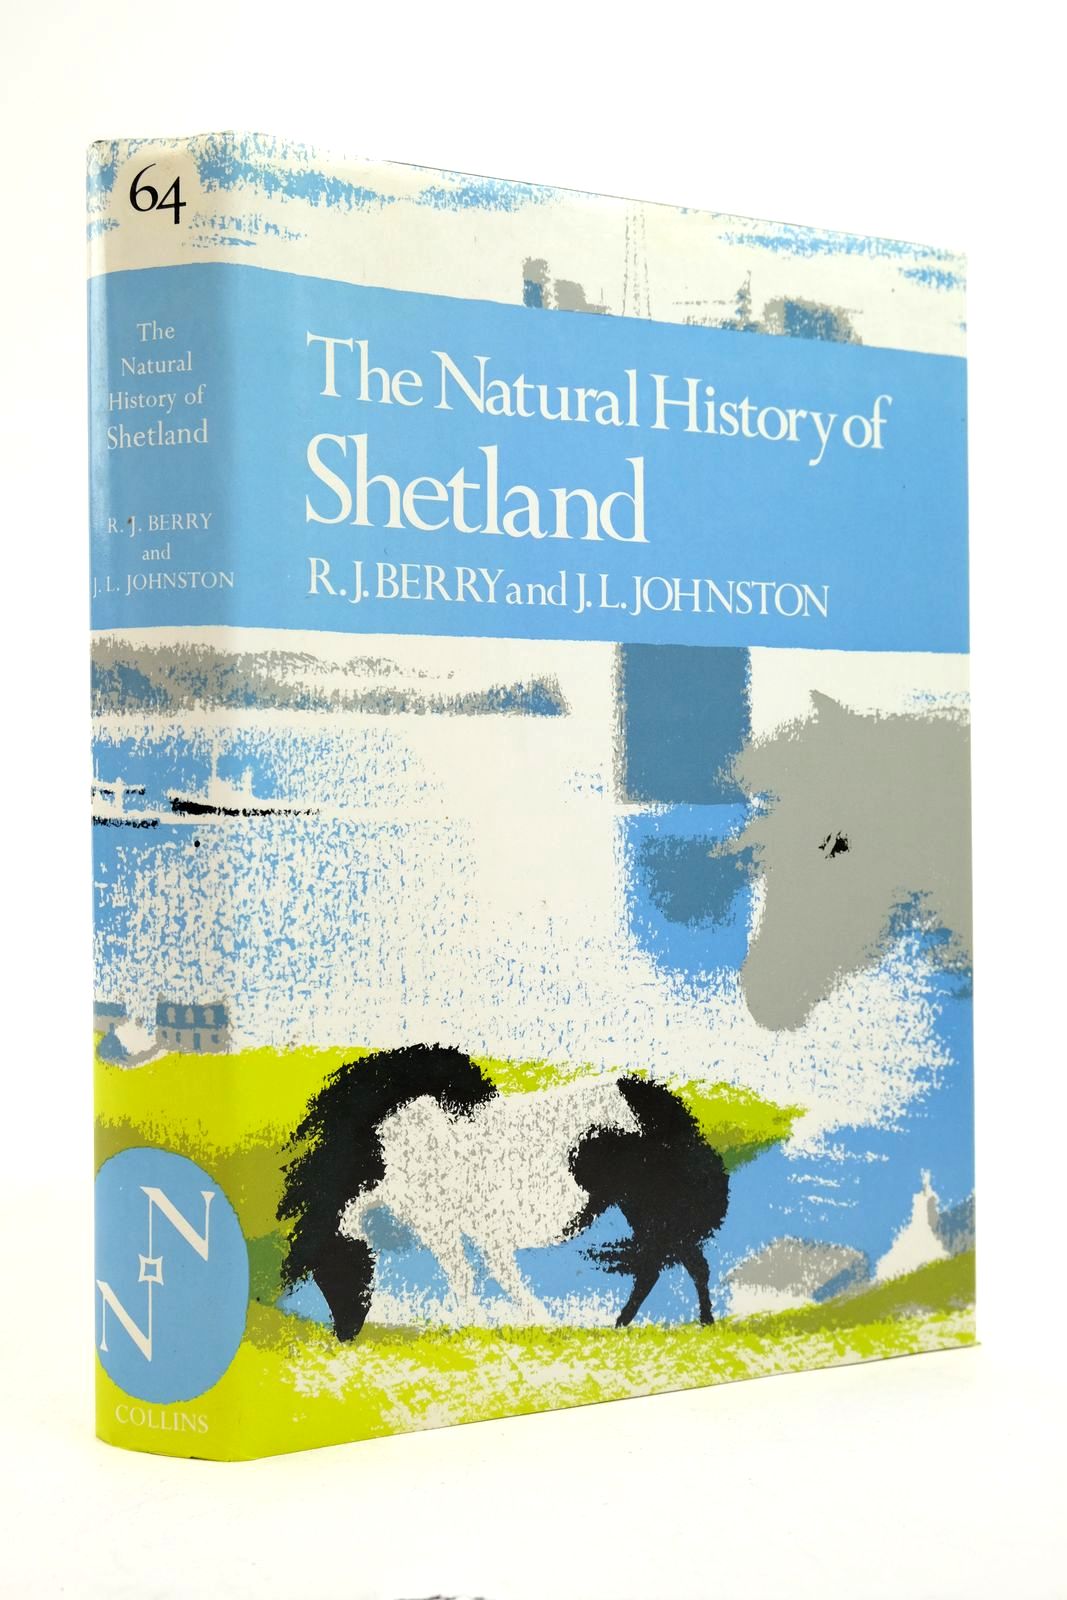 Photo of THE NATURAL HISTORY OF SHETLAND (NN 64) written by Berry, R.J. Johnston, J.L. published by Collins (STOCK CODE: 2139669)  for sale by Stella & Rose's Books